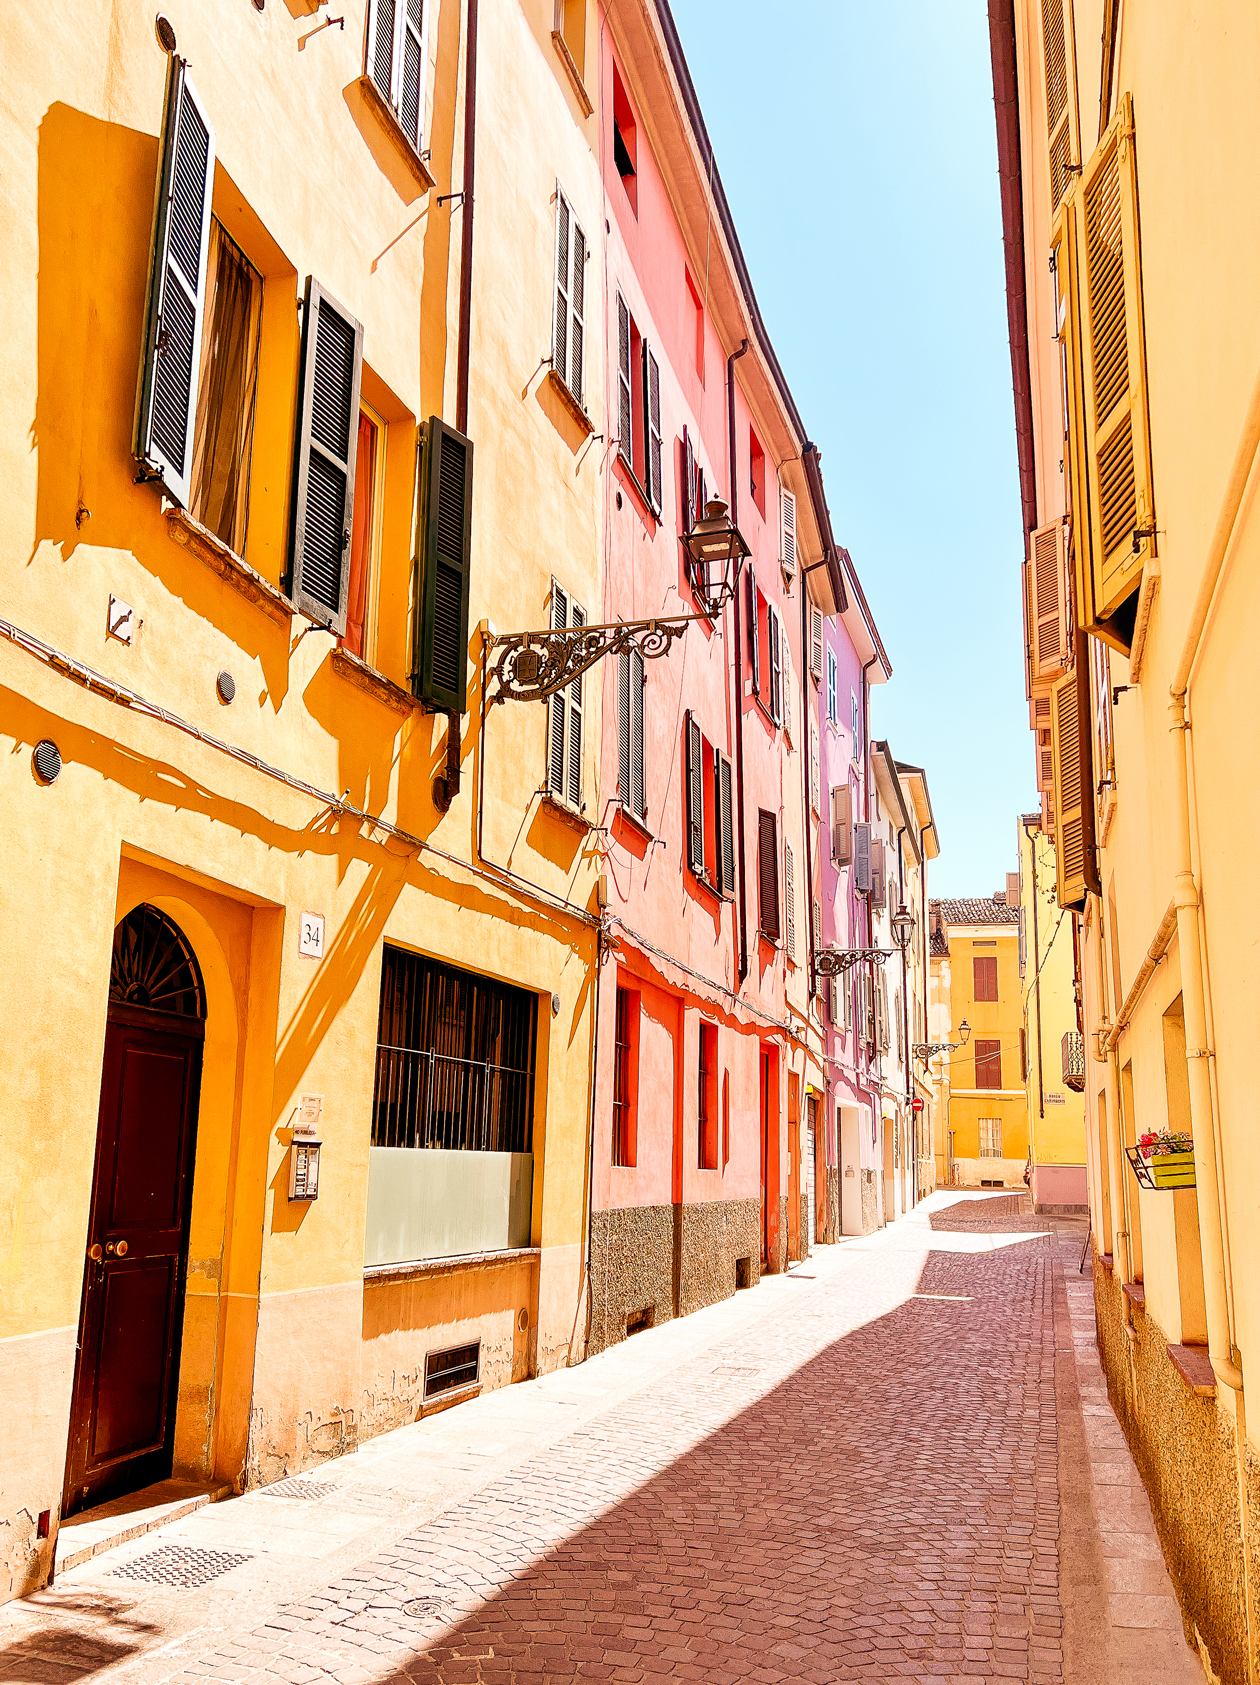 Parma Italy is full of colorful houses!